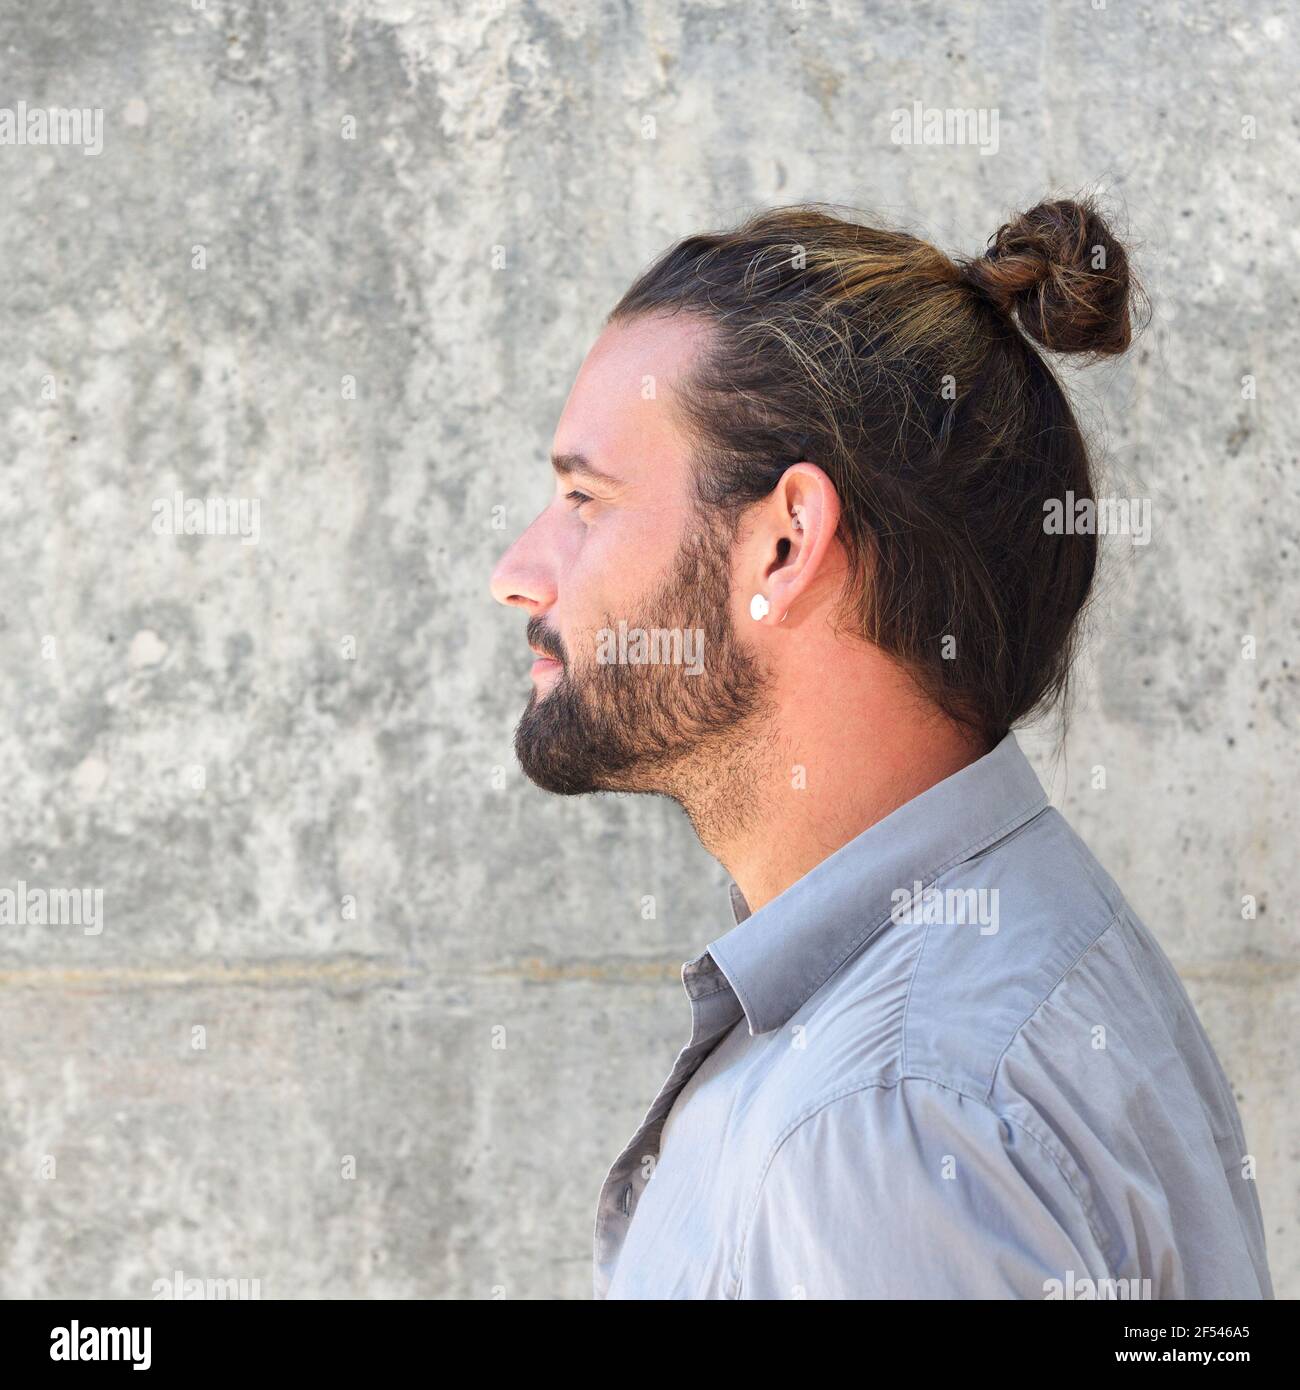 Close up side portrait of serious man with beard and hair bun Stock Photo